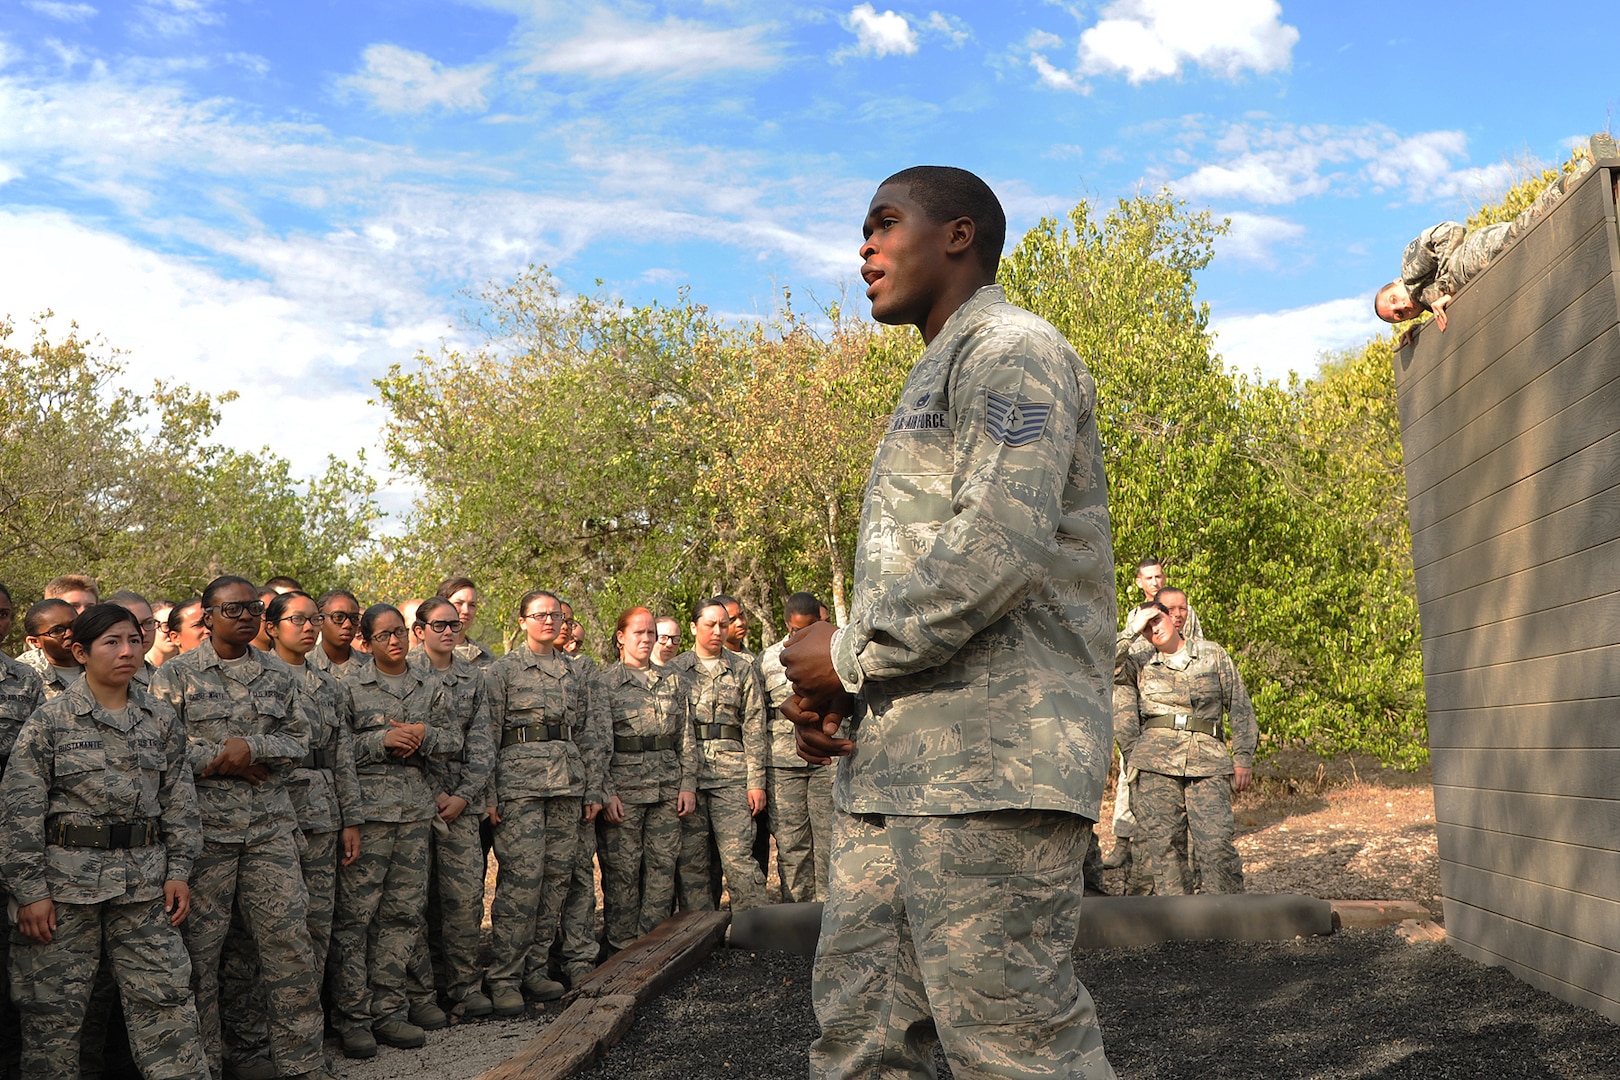 Air Force revamps first week of boot camp to build trust, life skills